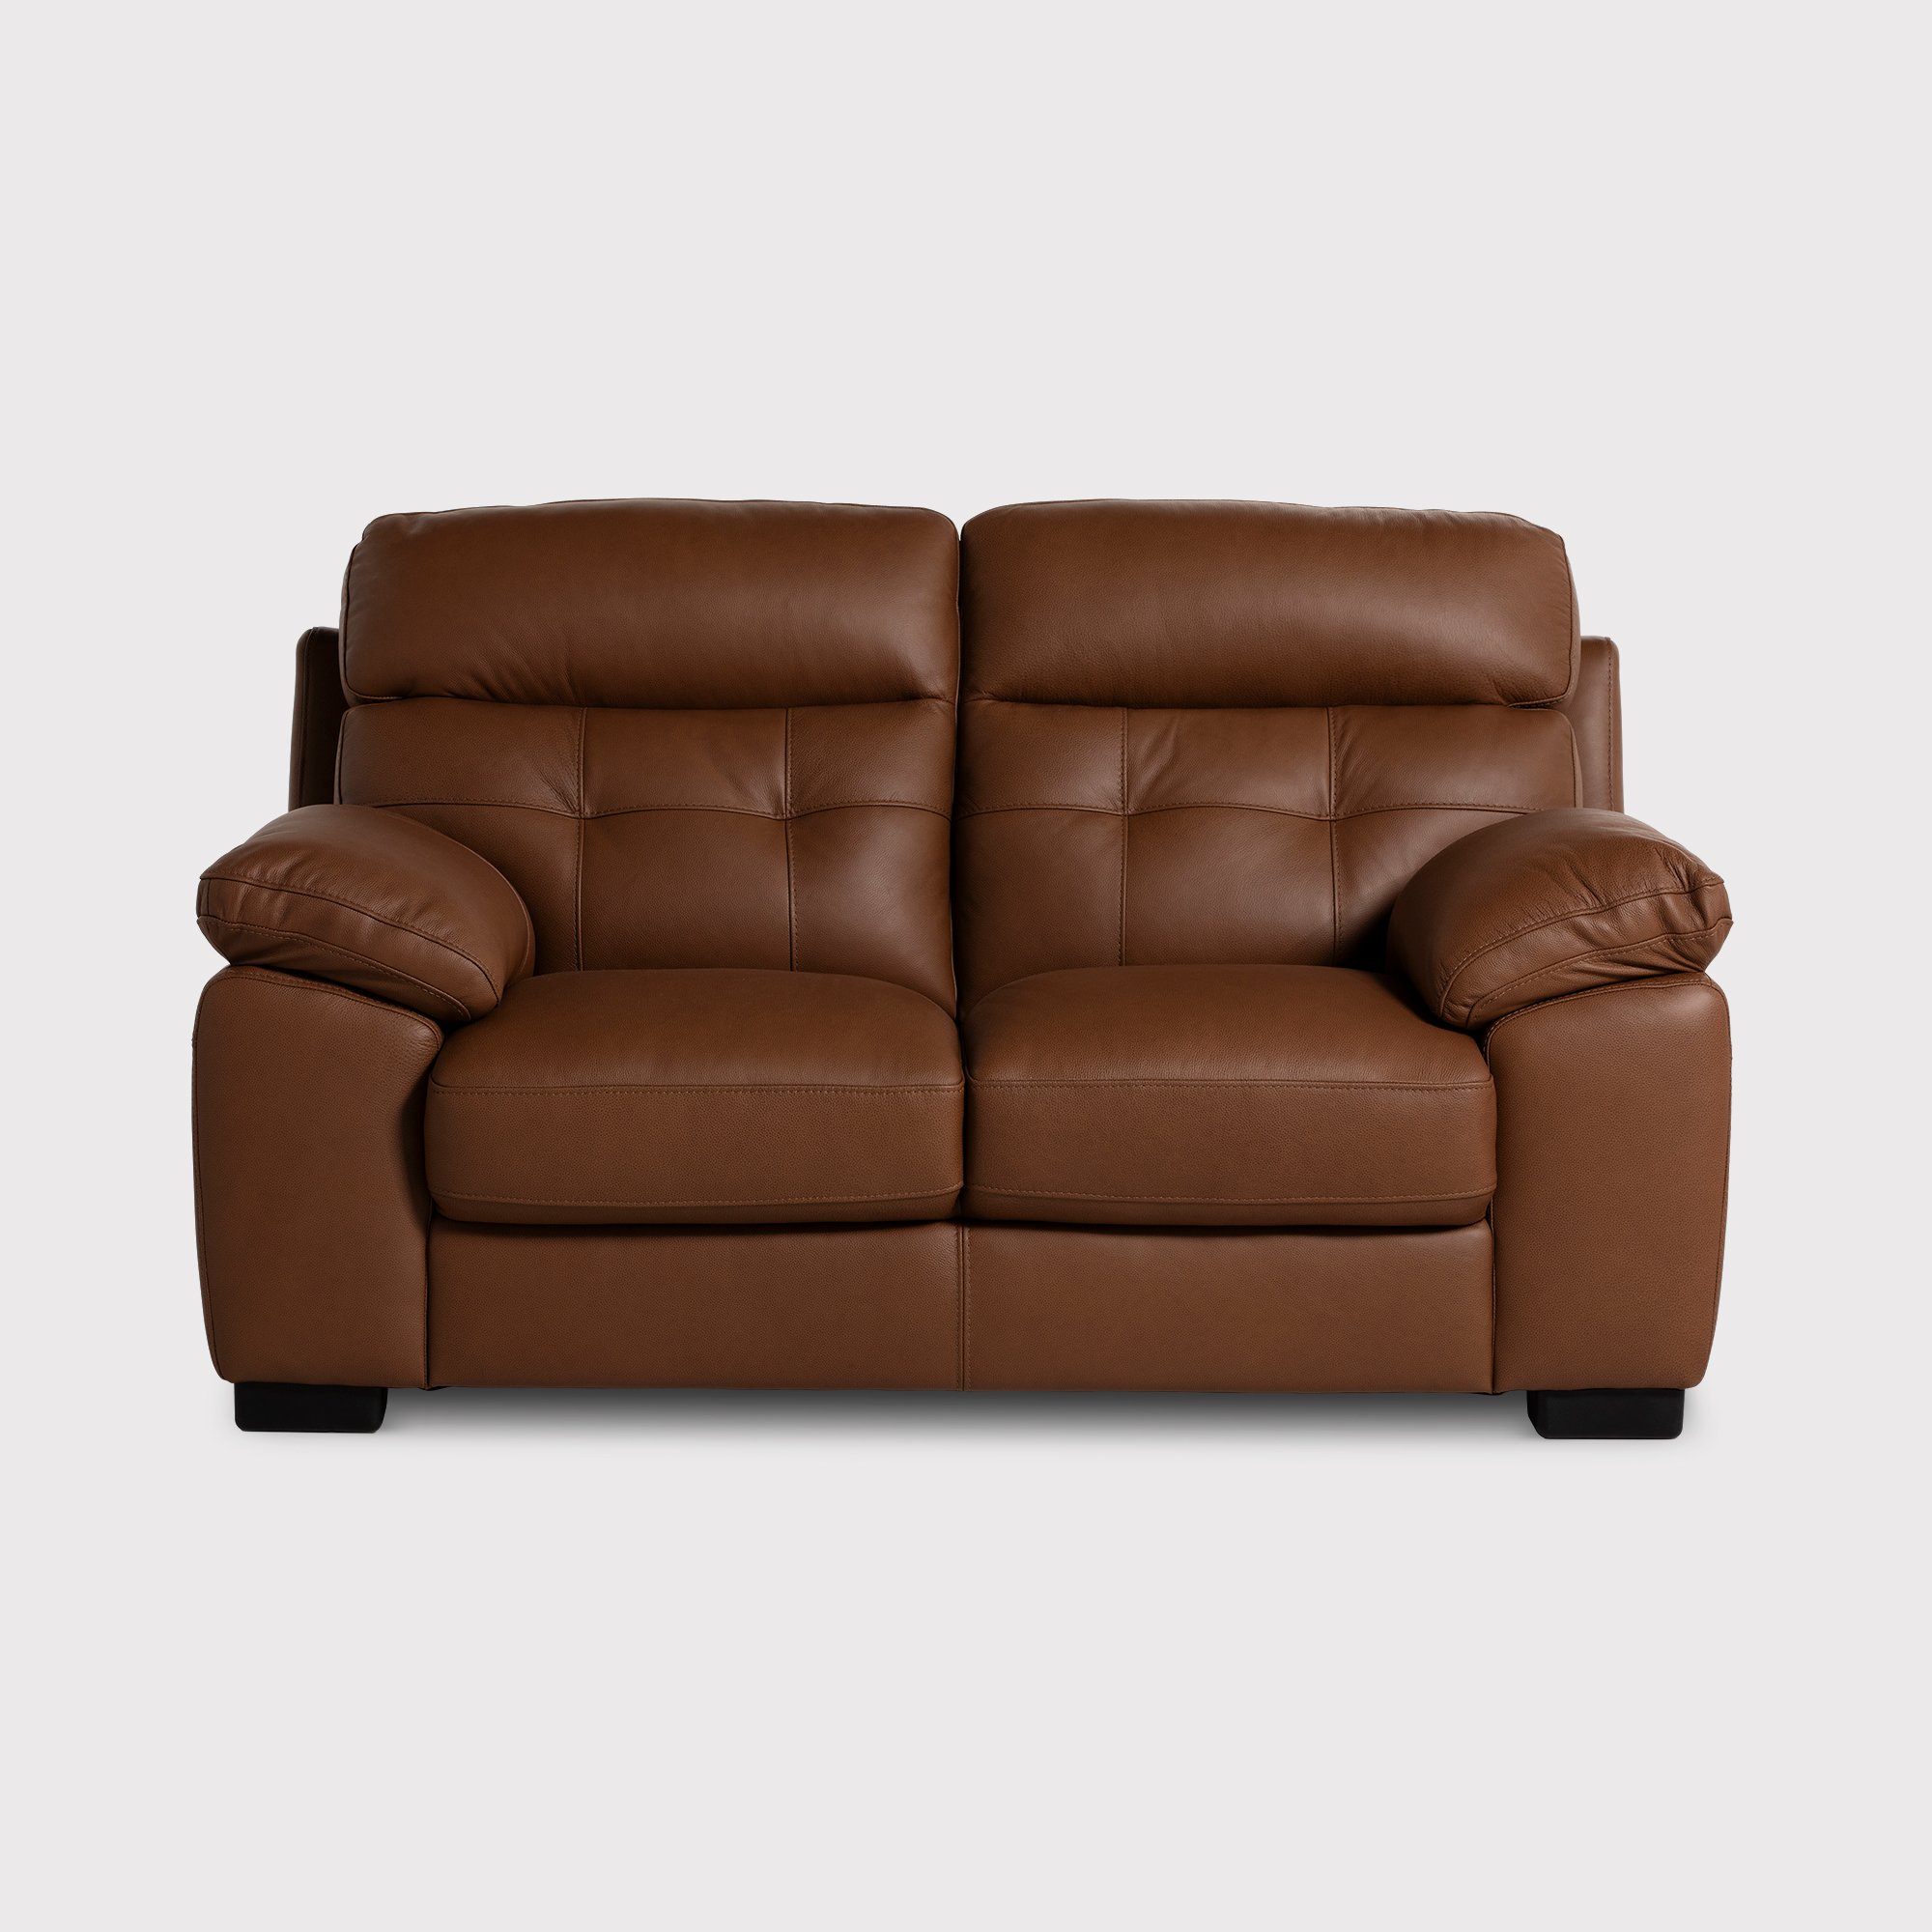 Holborn 2 Seater Static Sofa, Brown Leather | Barker & Stonehouse